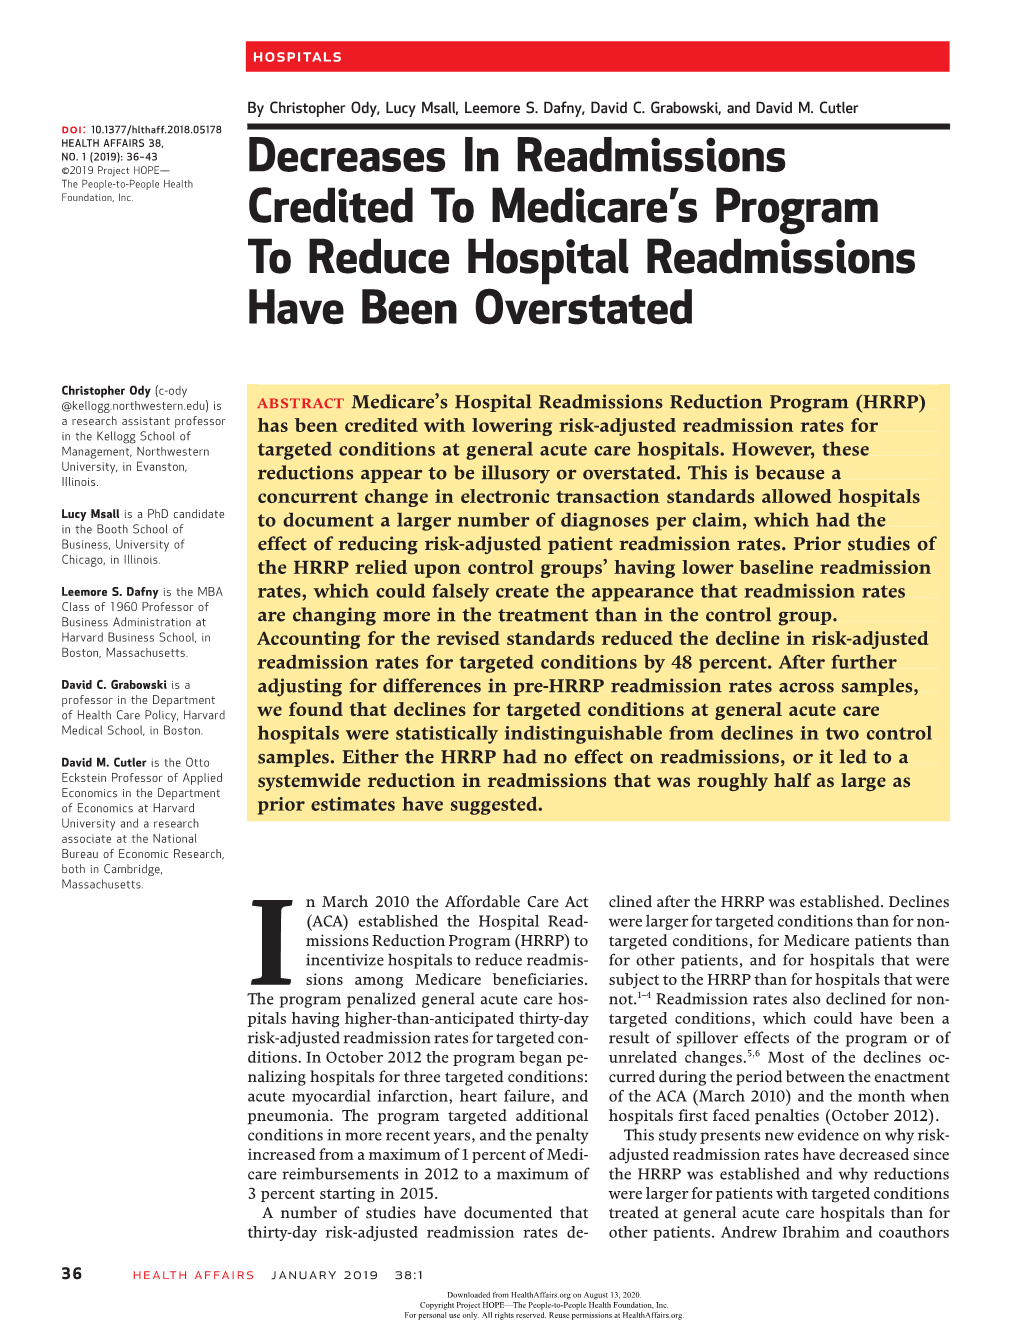 Decreases in Readmissions Credited to Medicare's Program to Reduce